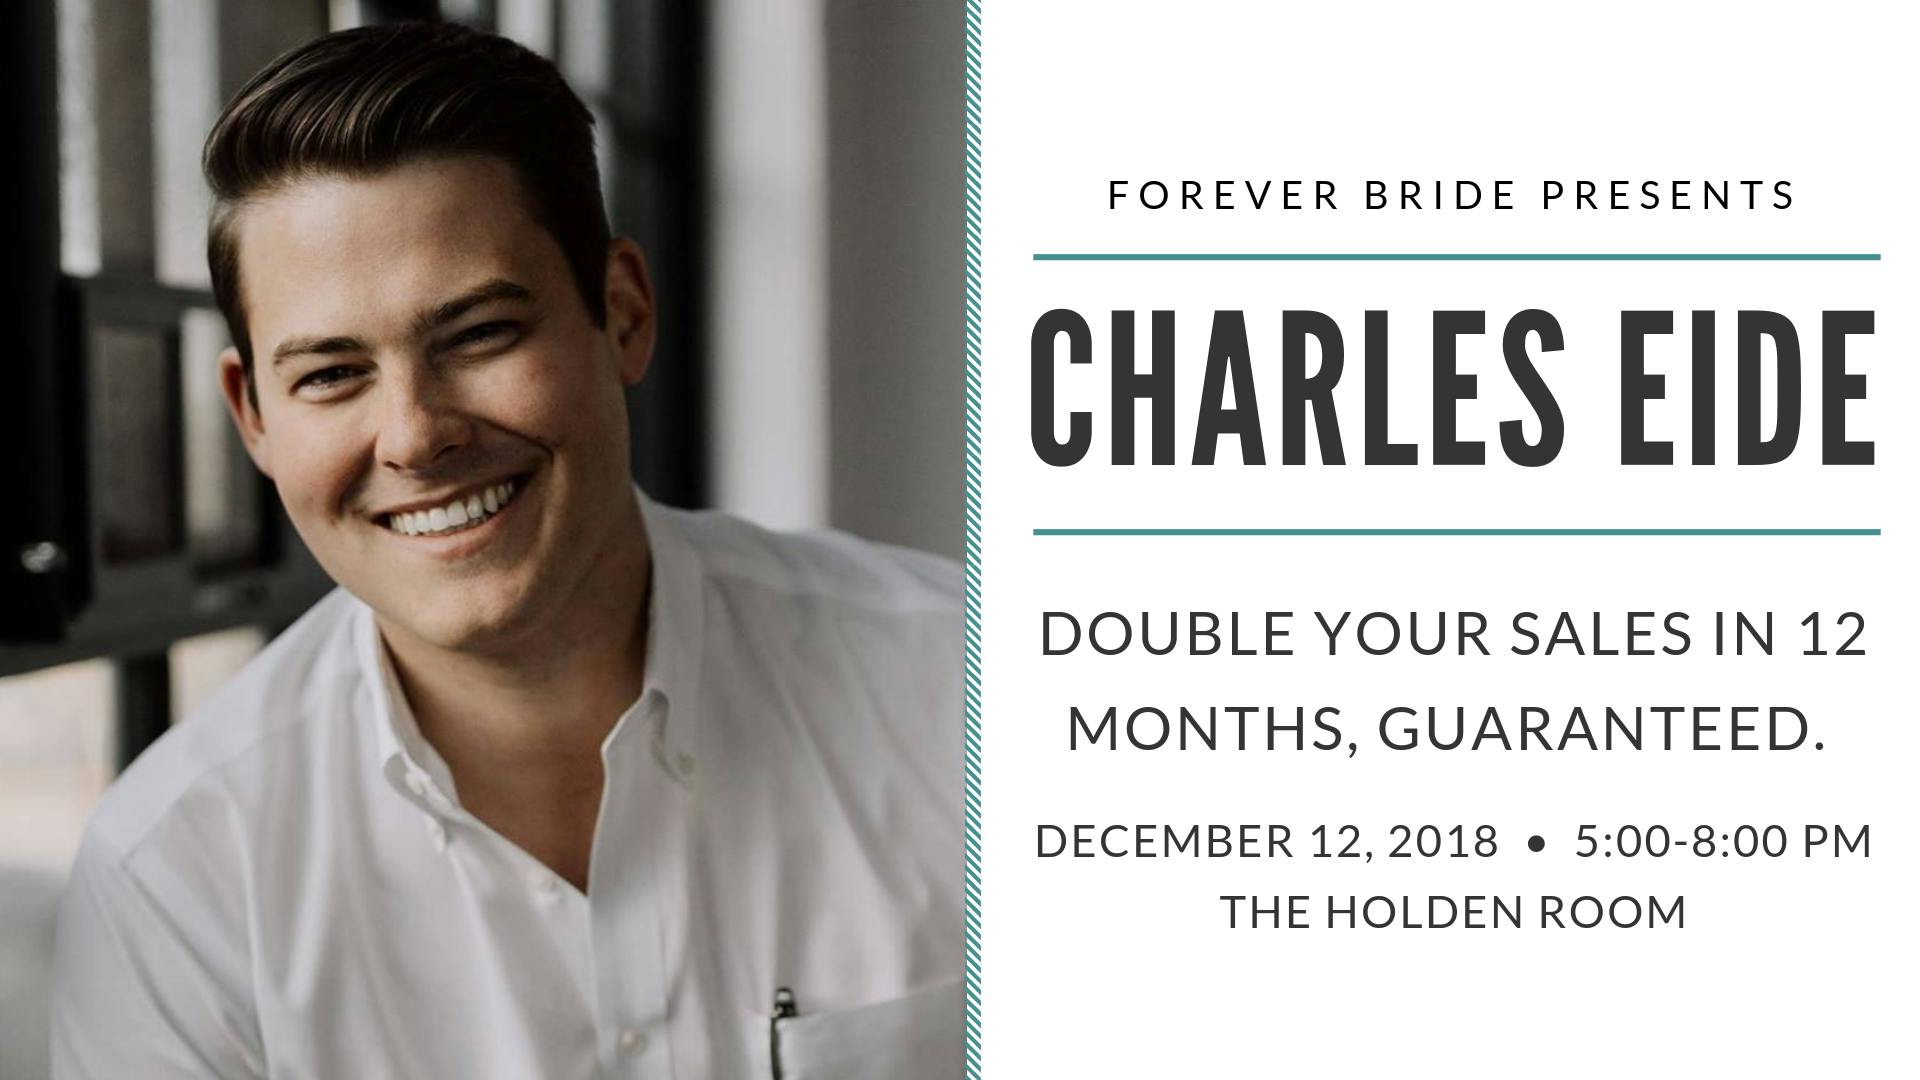 Double Your Sales in 12 Months, Guaranteed. By Charles Eide.